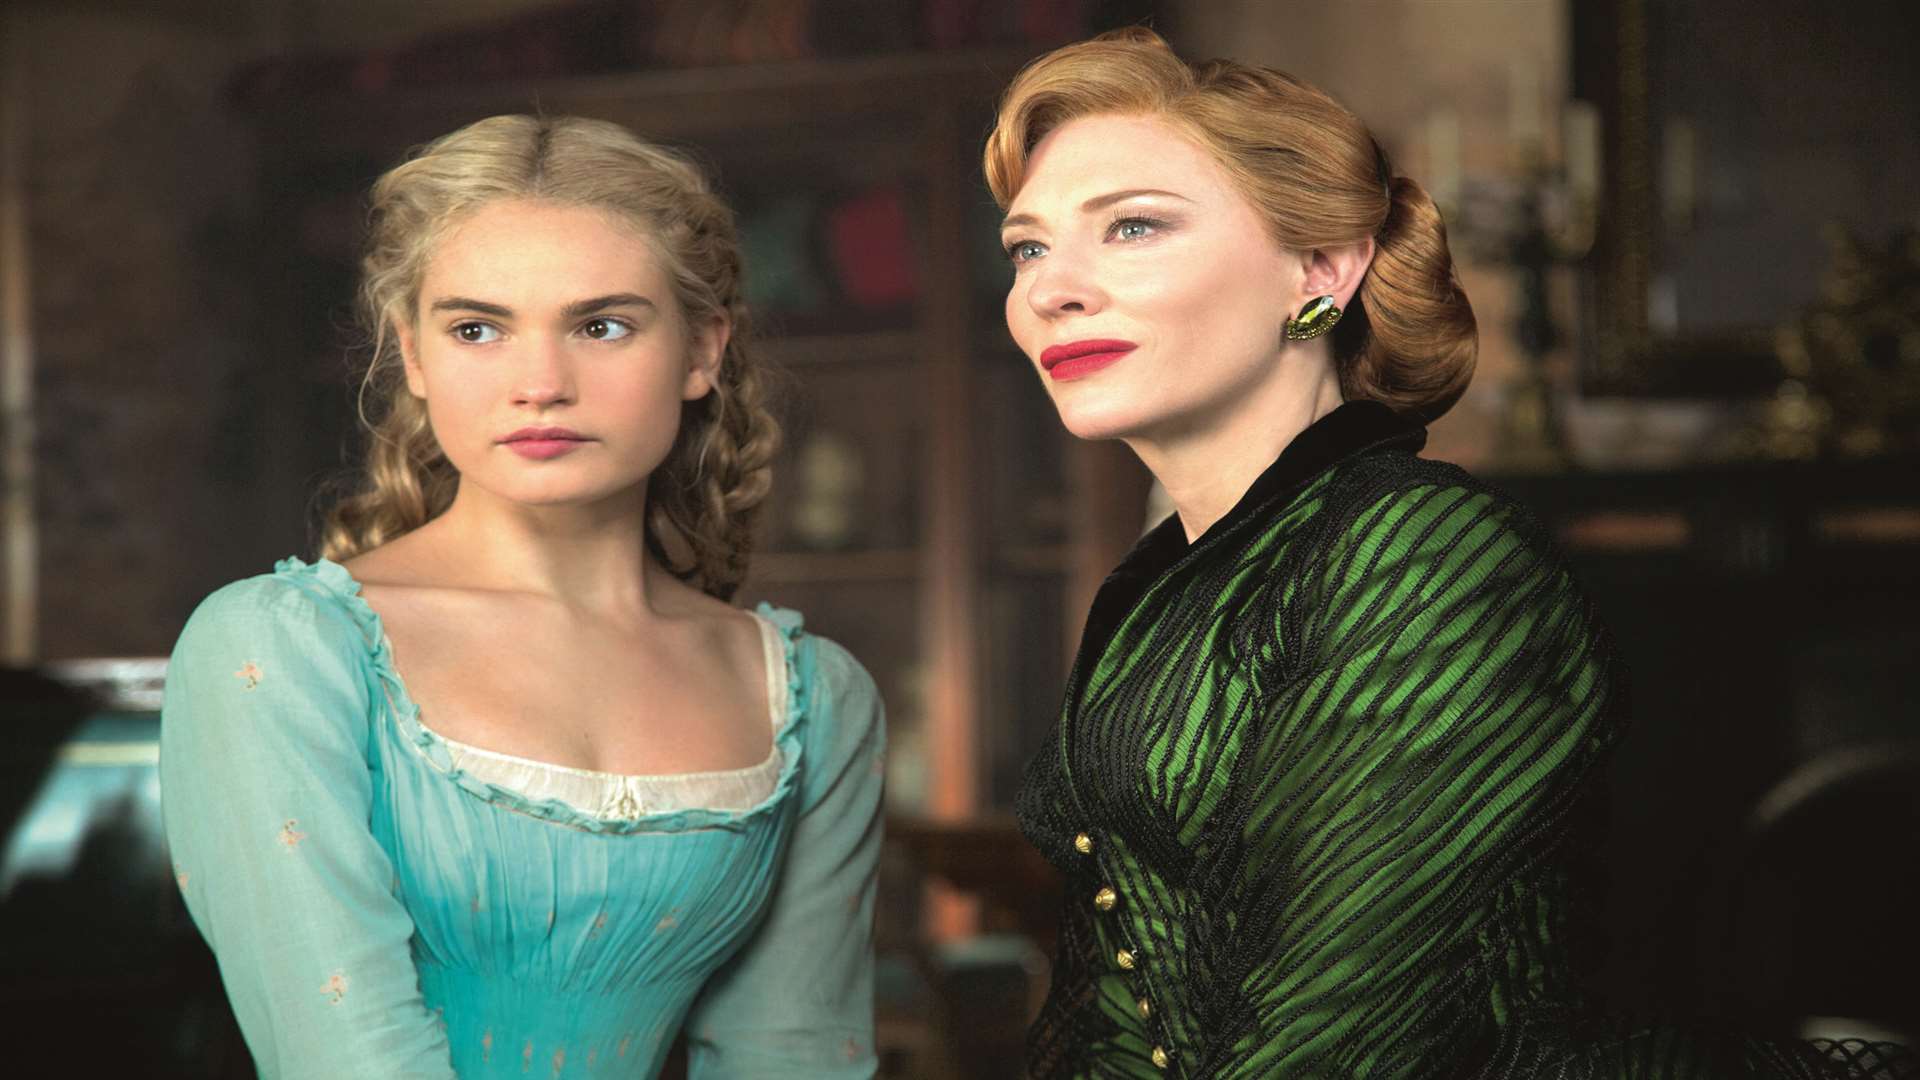 Lily James as Cinderella and Cate Blanchett as the Stepmother in Cinderella, which is on Christmas Day